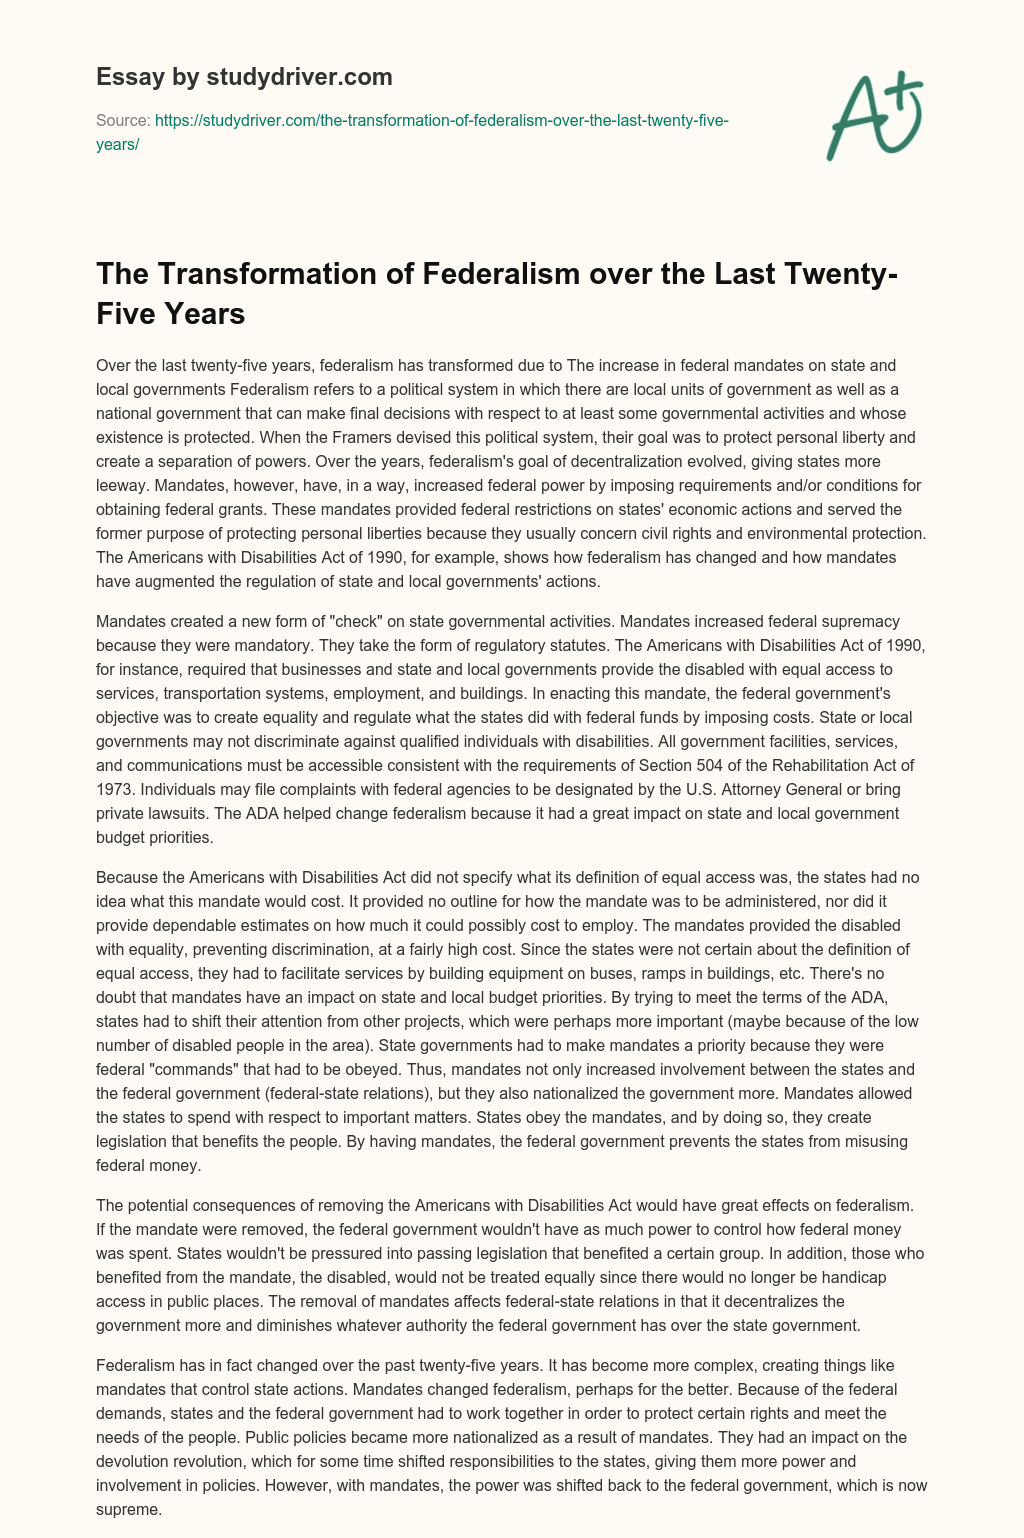 The Transformation of Federalism over the Last Twenty-Five Years essay